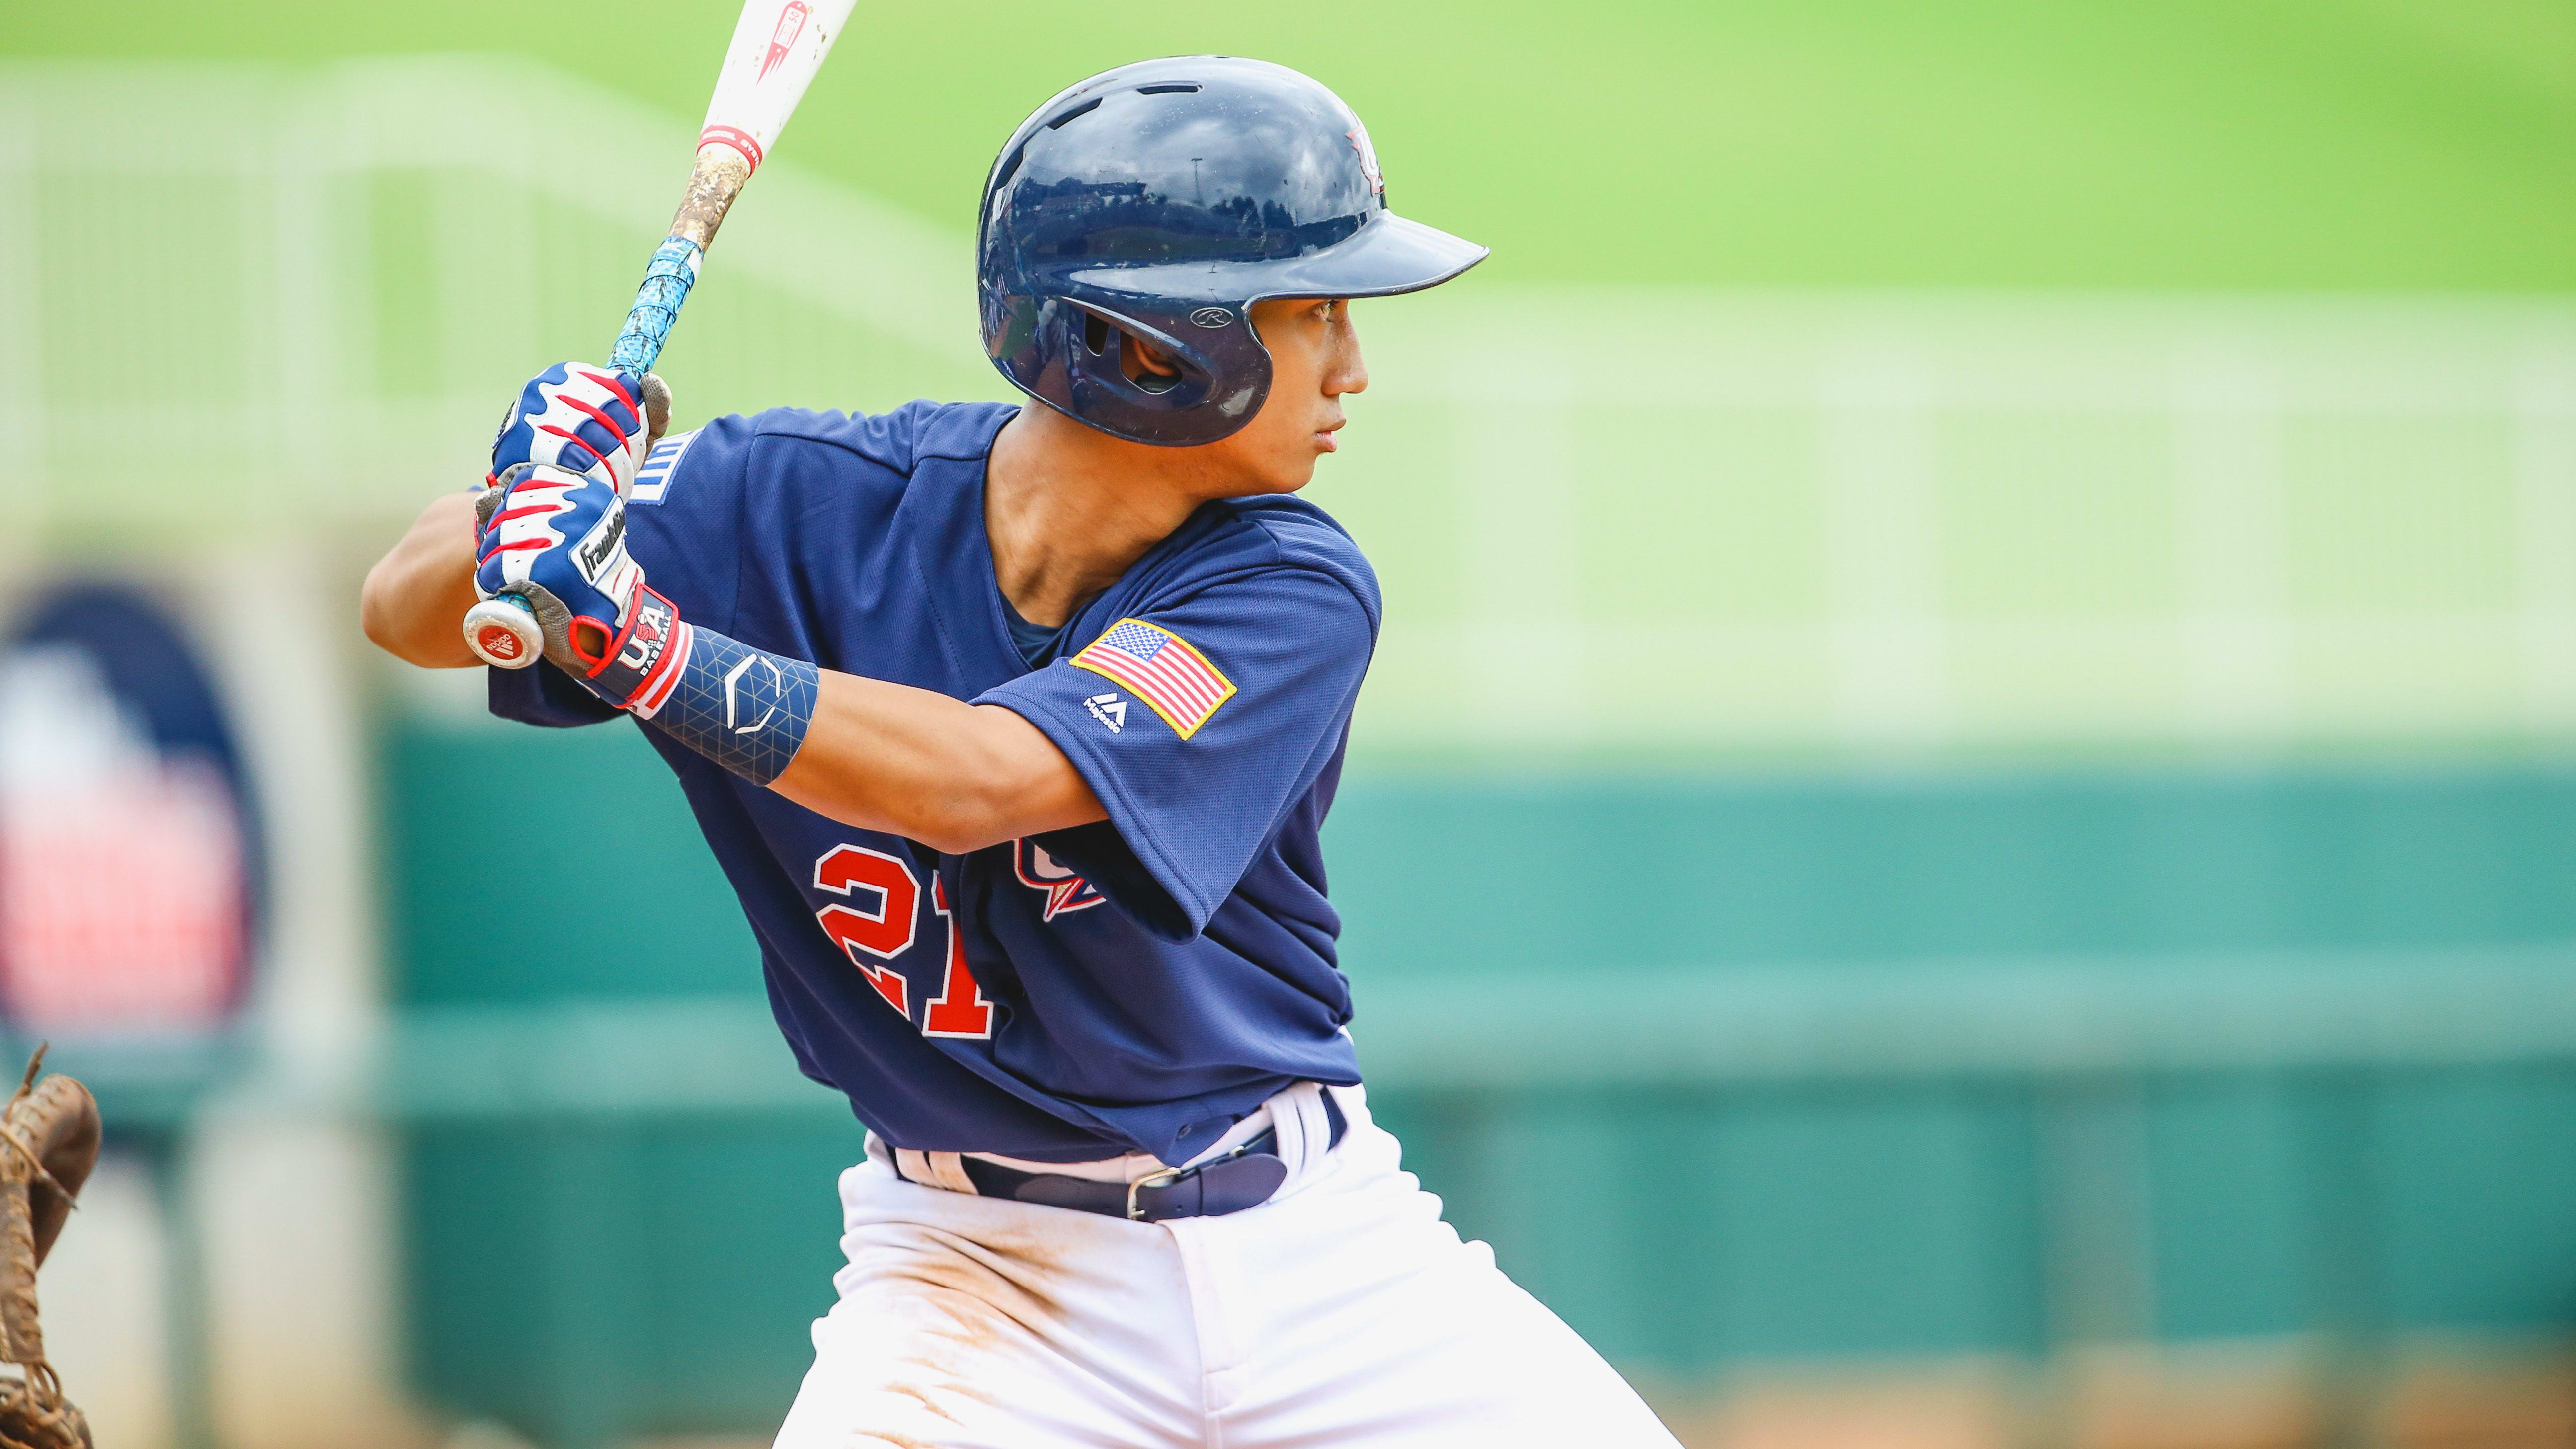 Stars Come Out on Top 13-7 in Game 1 USA Baseball photo